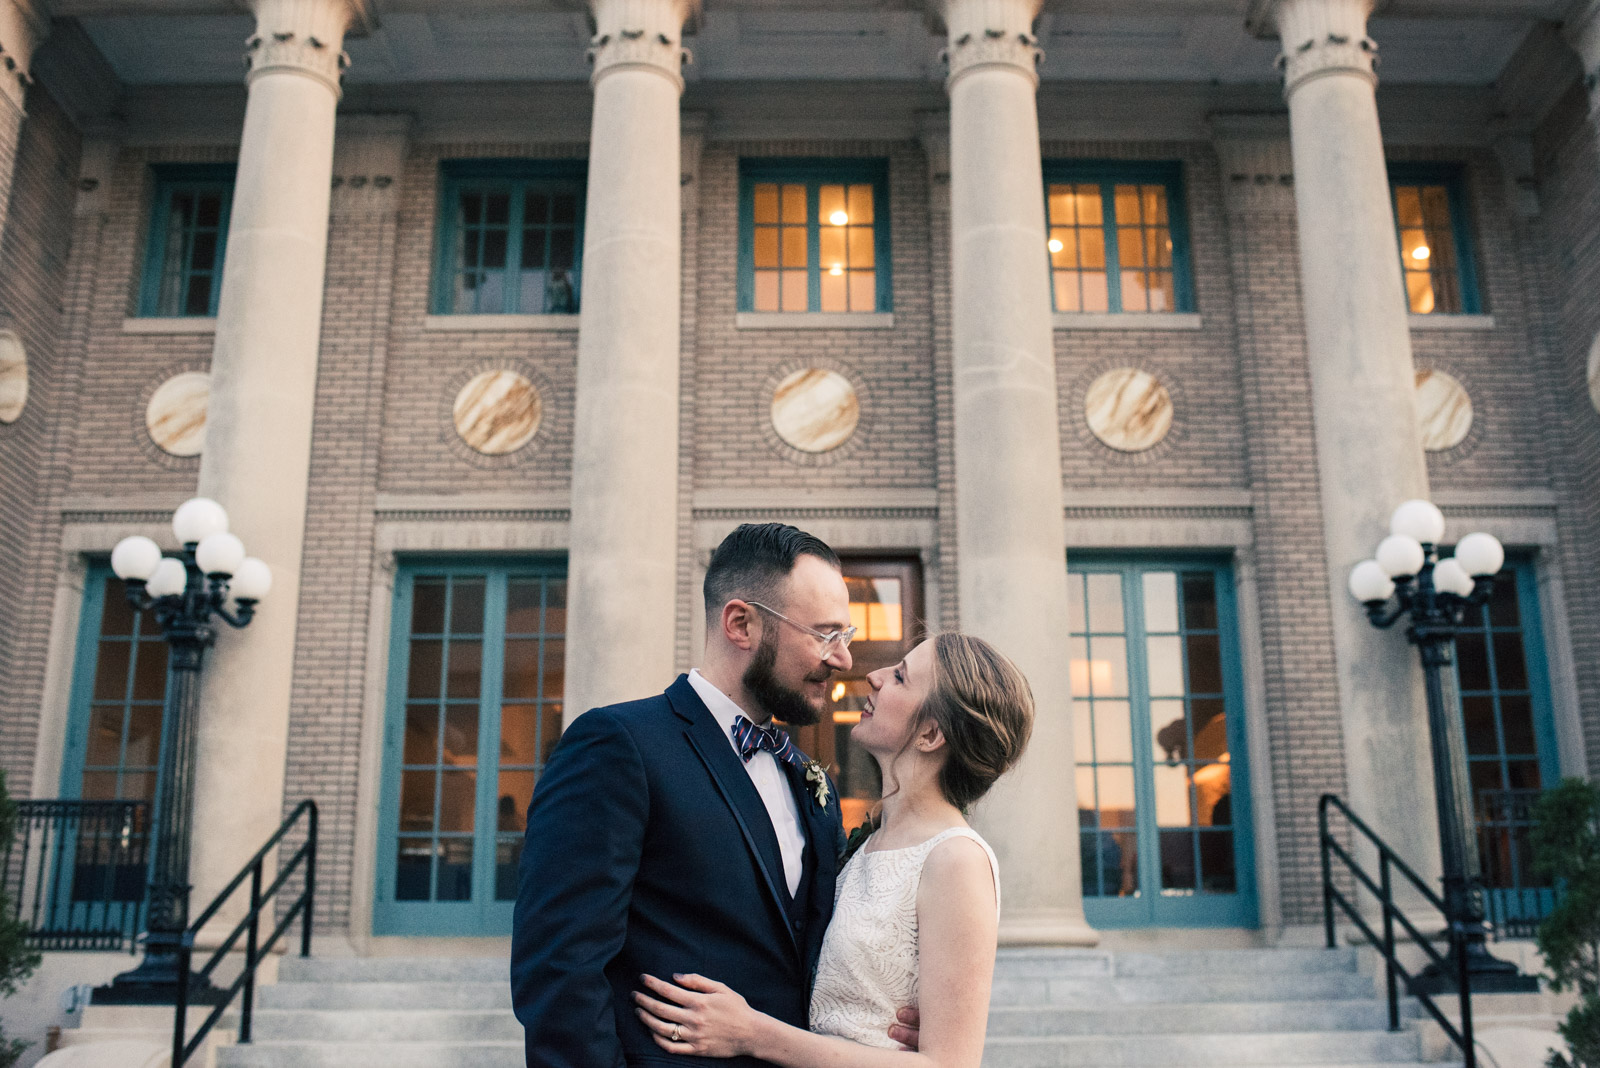 Featured image for “Joey and Sam’s Wedding | Historic Post Office, Hampton”